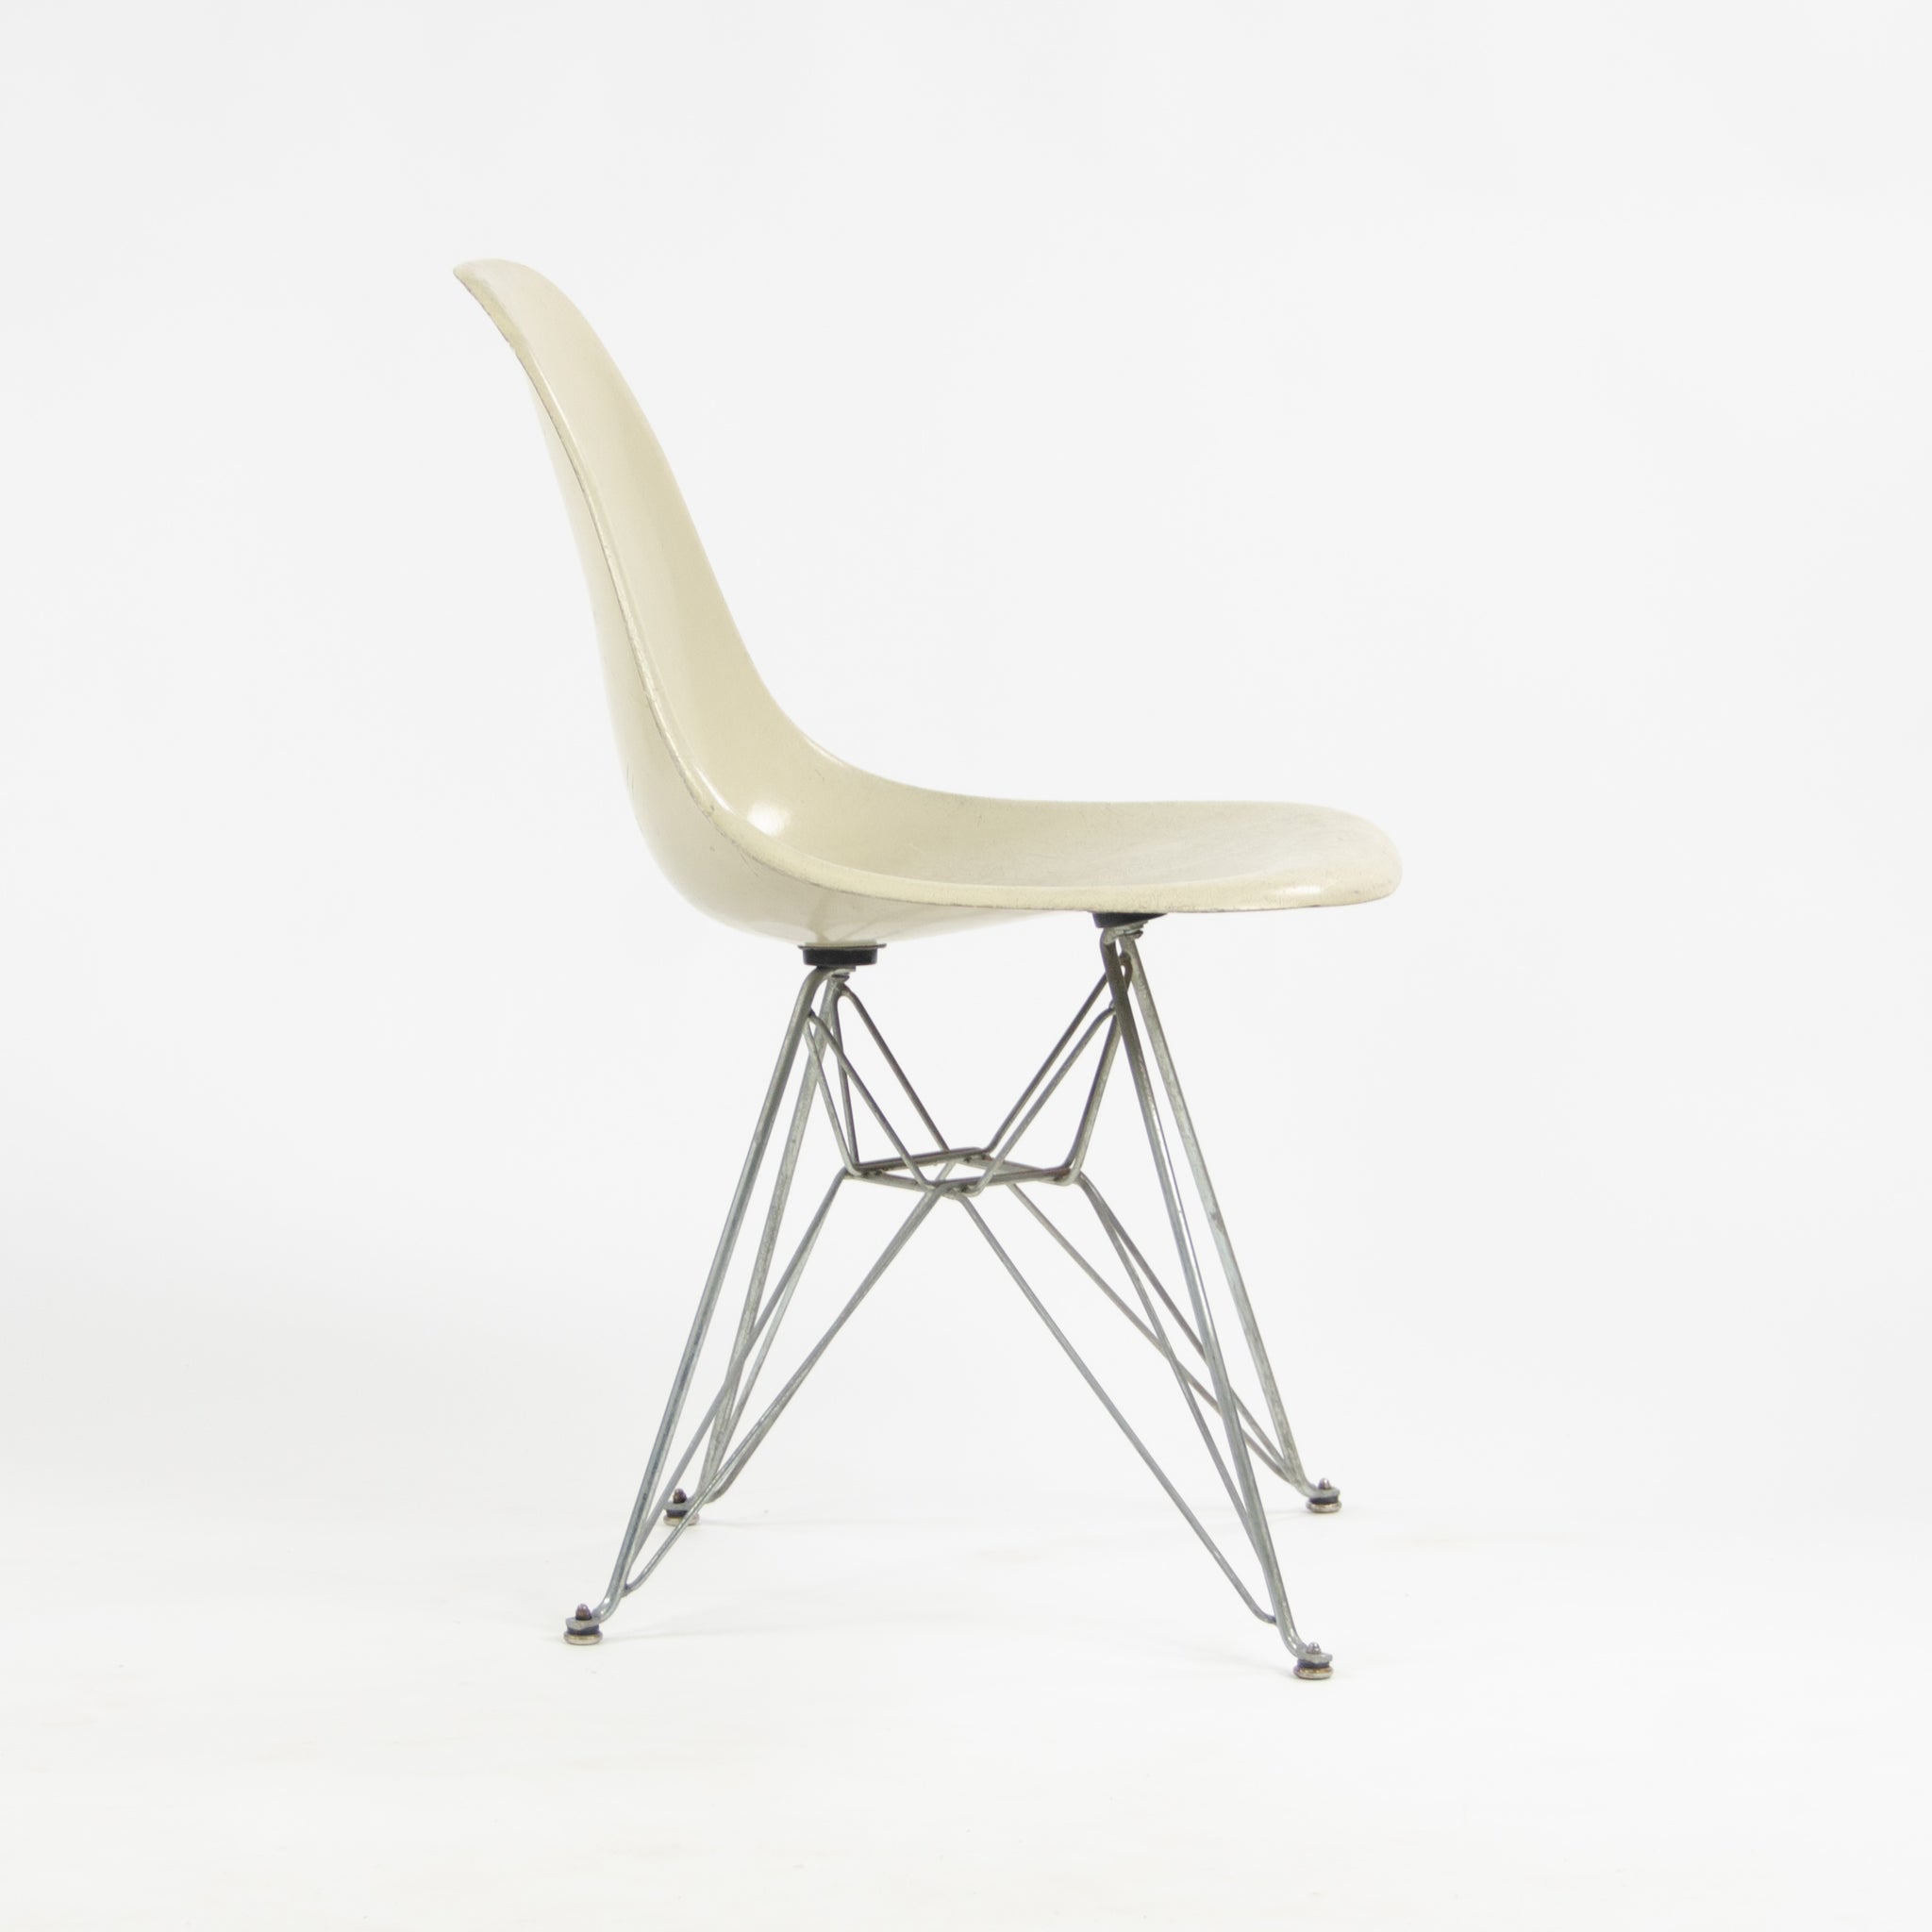 Eiffel Chair by Charles & Ray Eames for Herman Miller, 1958 for sale at  Pamono